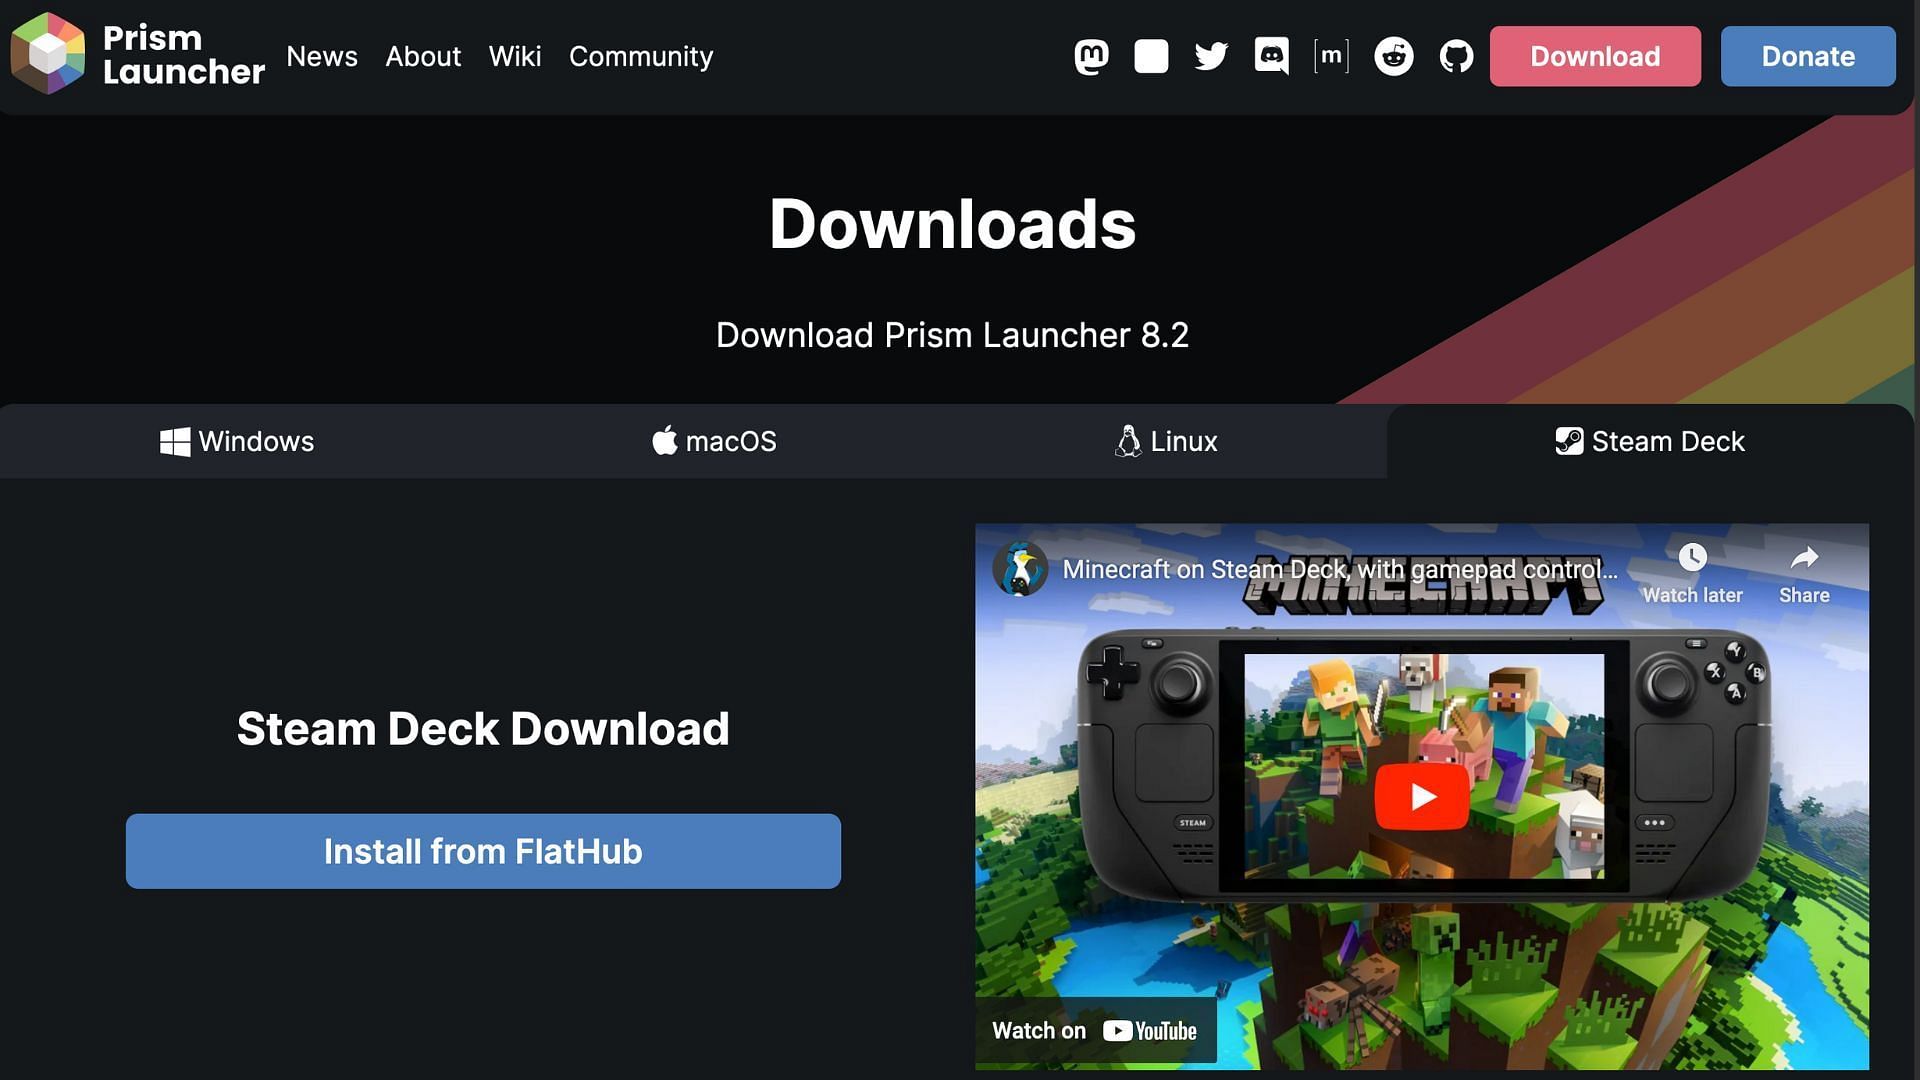 The Prism Launcher for Minecraft (Image via Prism Launcher)